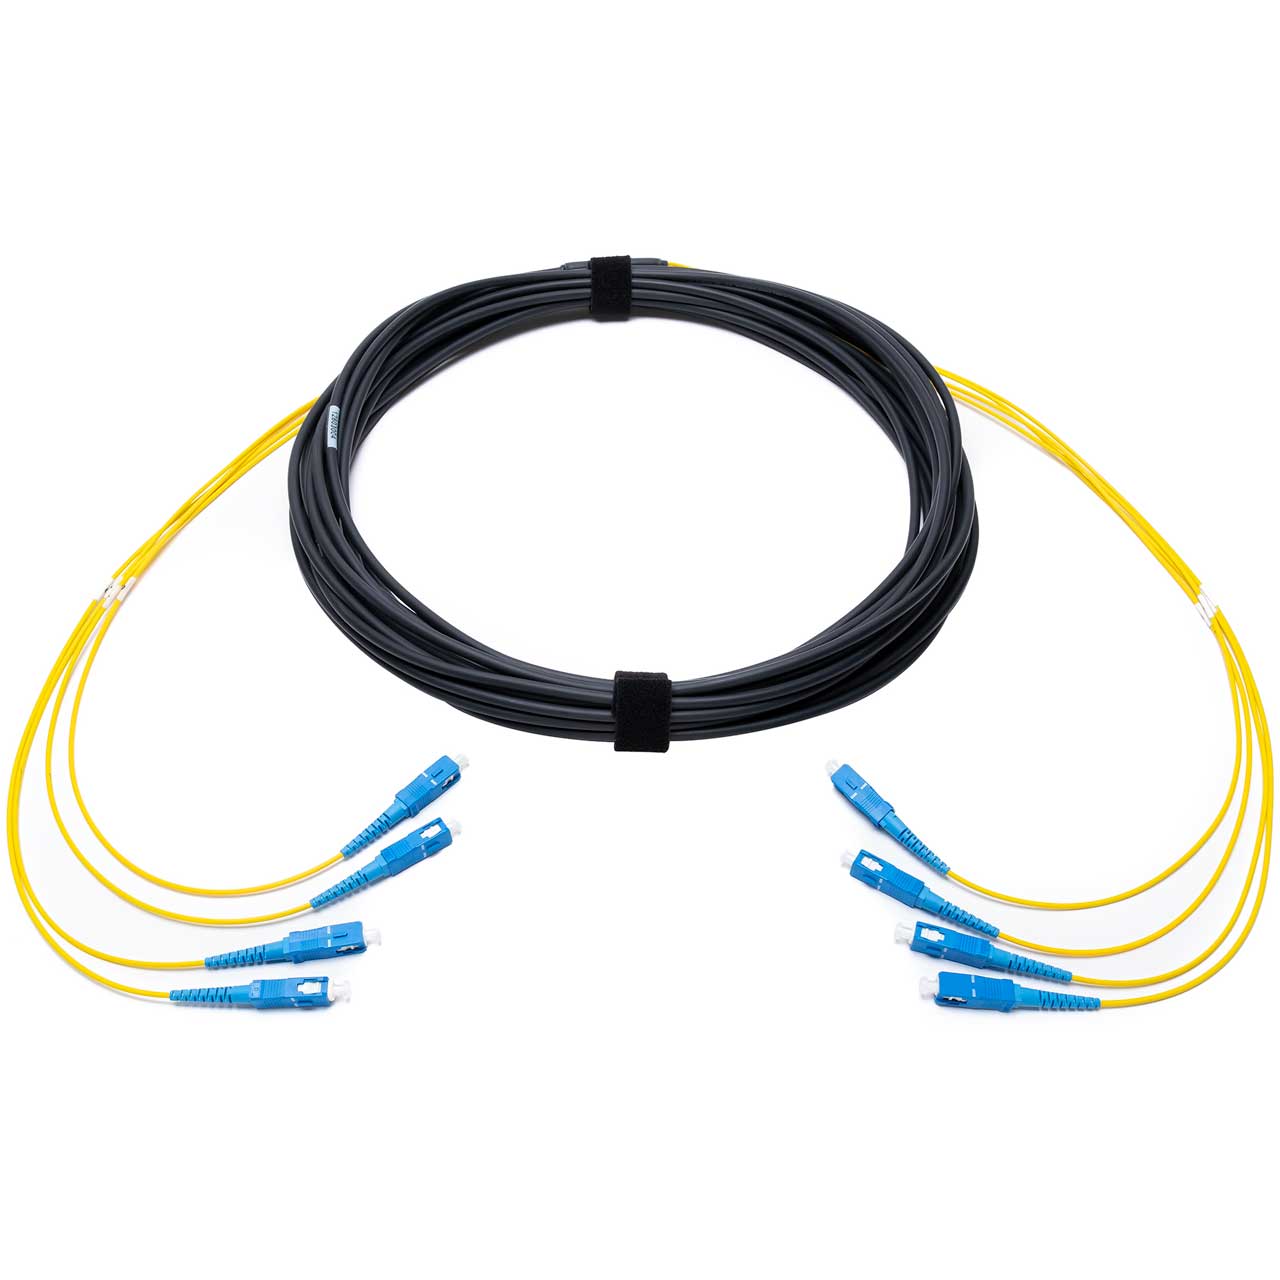 SC-UPC 4 Fiber Single Mode Fiber Cable Indoor/Outdoor LSZH 2mm 24inch Yellow Numbered Legs with Pulleye - 15 Meter